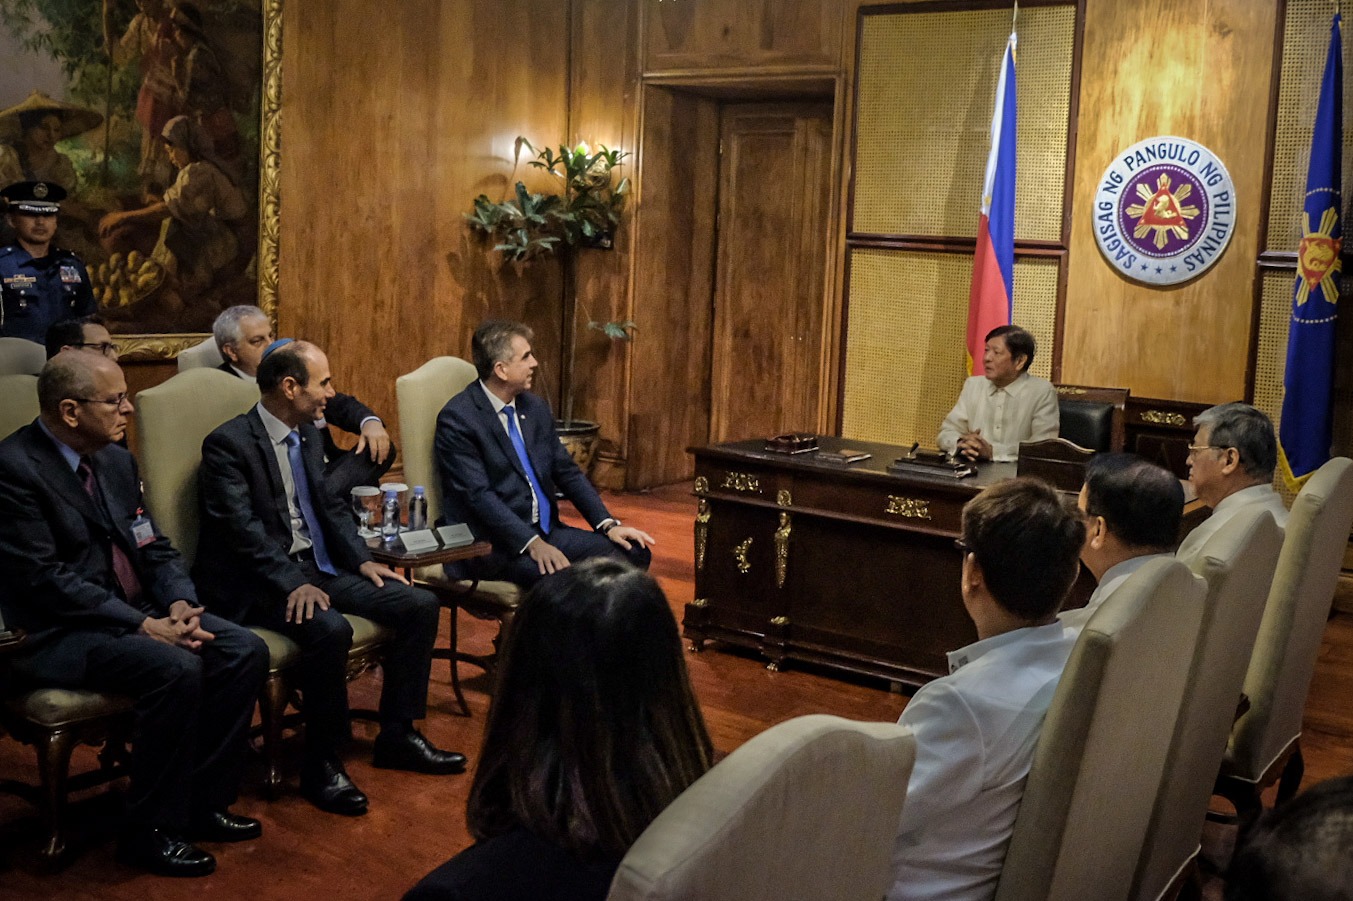 Israel Foreign Minister Eliyahu Cohen paid a courtesy call to President Ferdinand Marcos Jr. on Monday at Malacañang Palace. Cohen is in the Philippines for a two-day visit where he would meet with Philippine officials for several issues. (Photo from PPA pool)